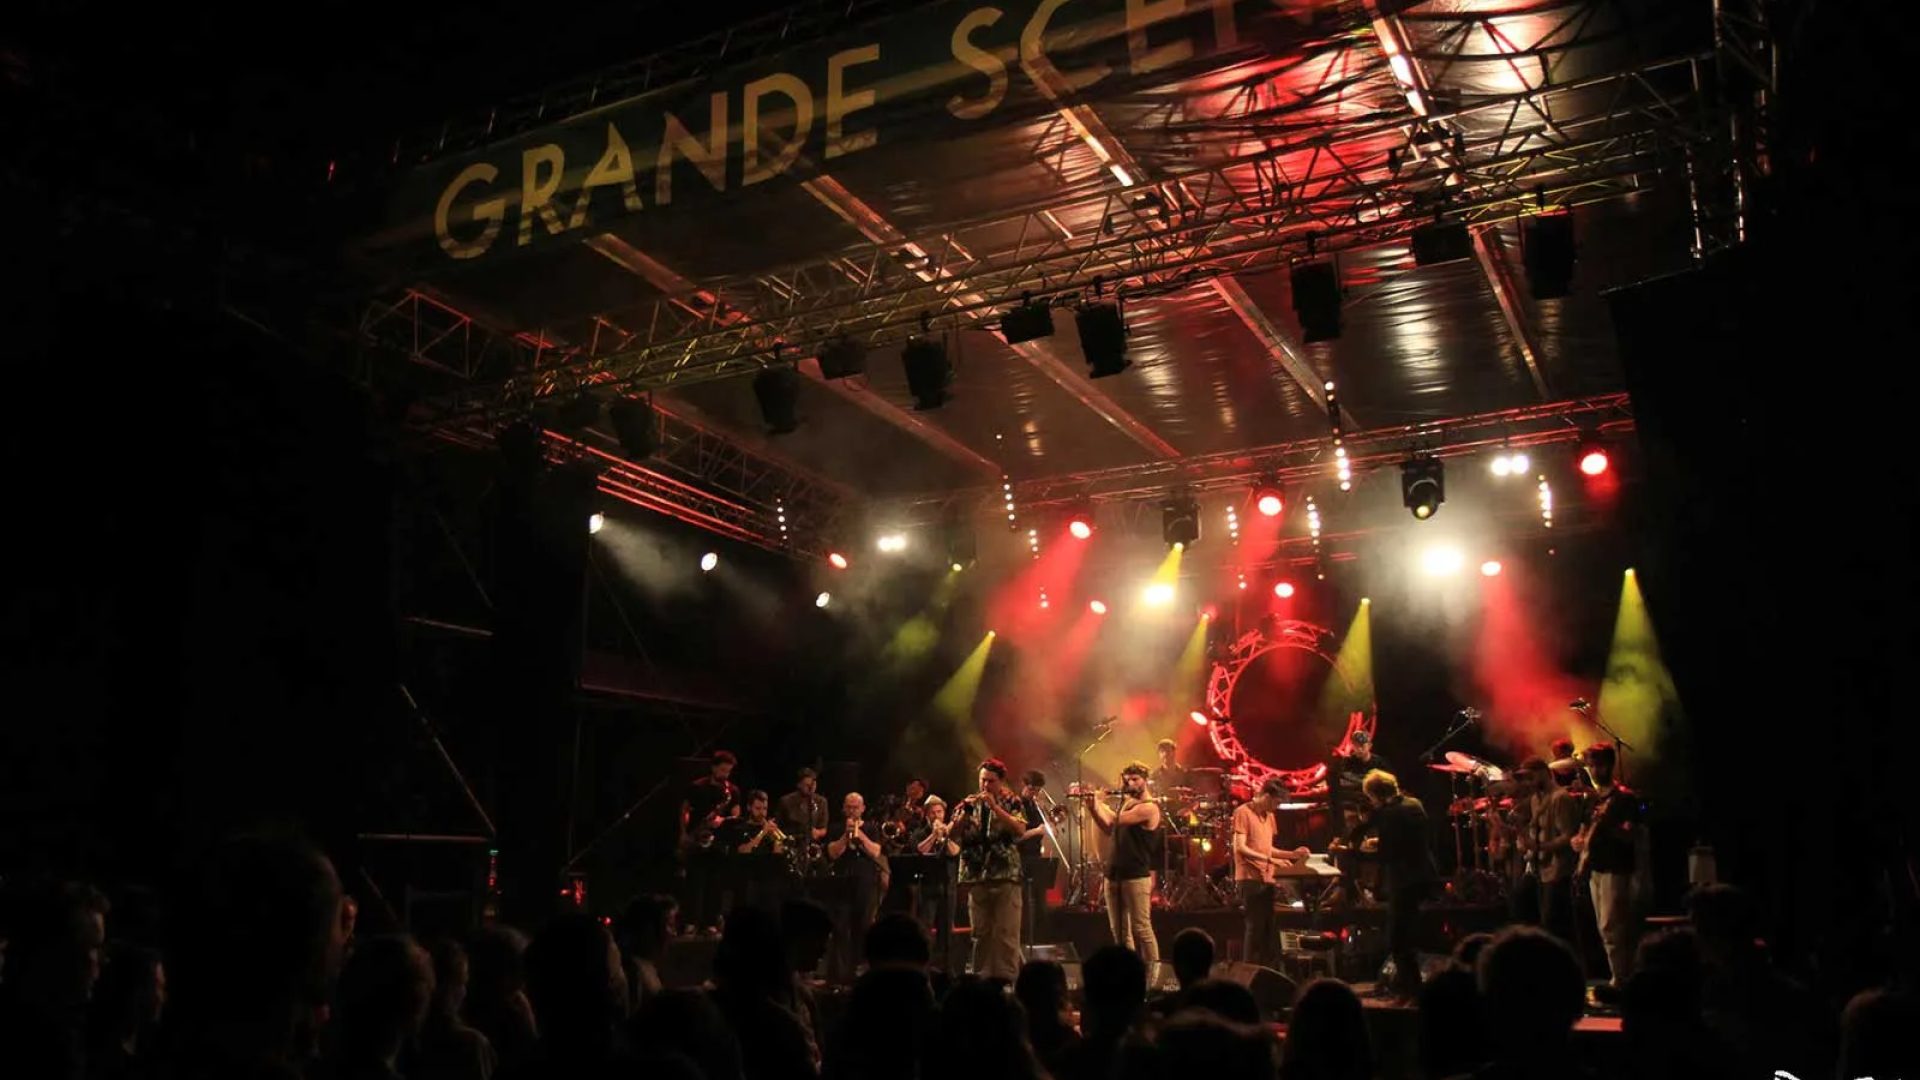 A music group plays on the main stage of the Festival du Monastier in Haute-Loire, Auvergne